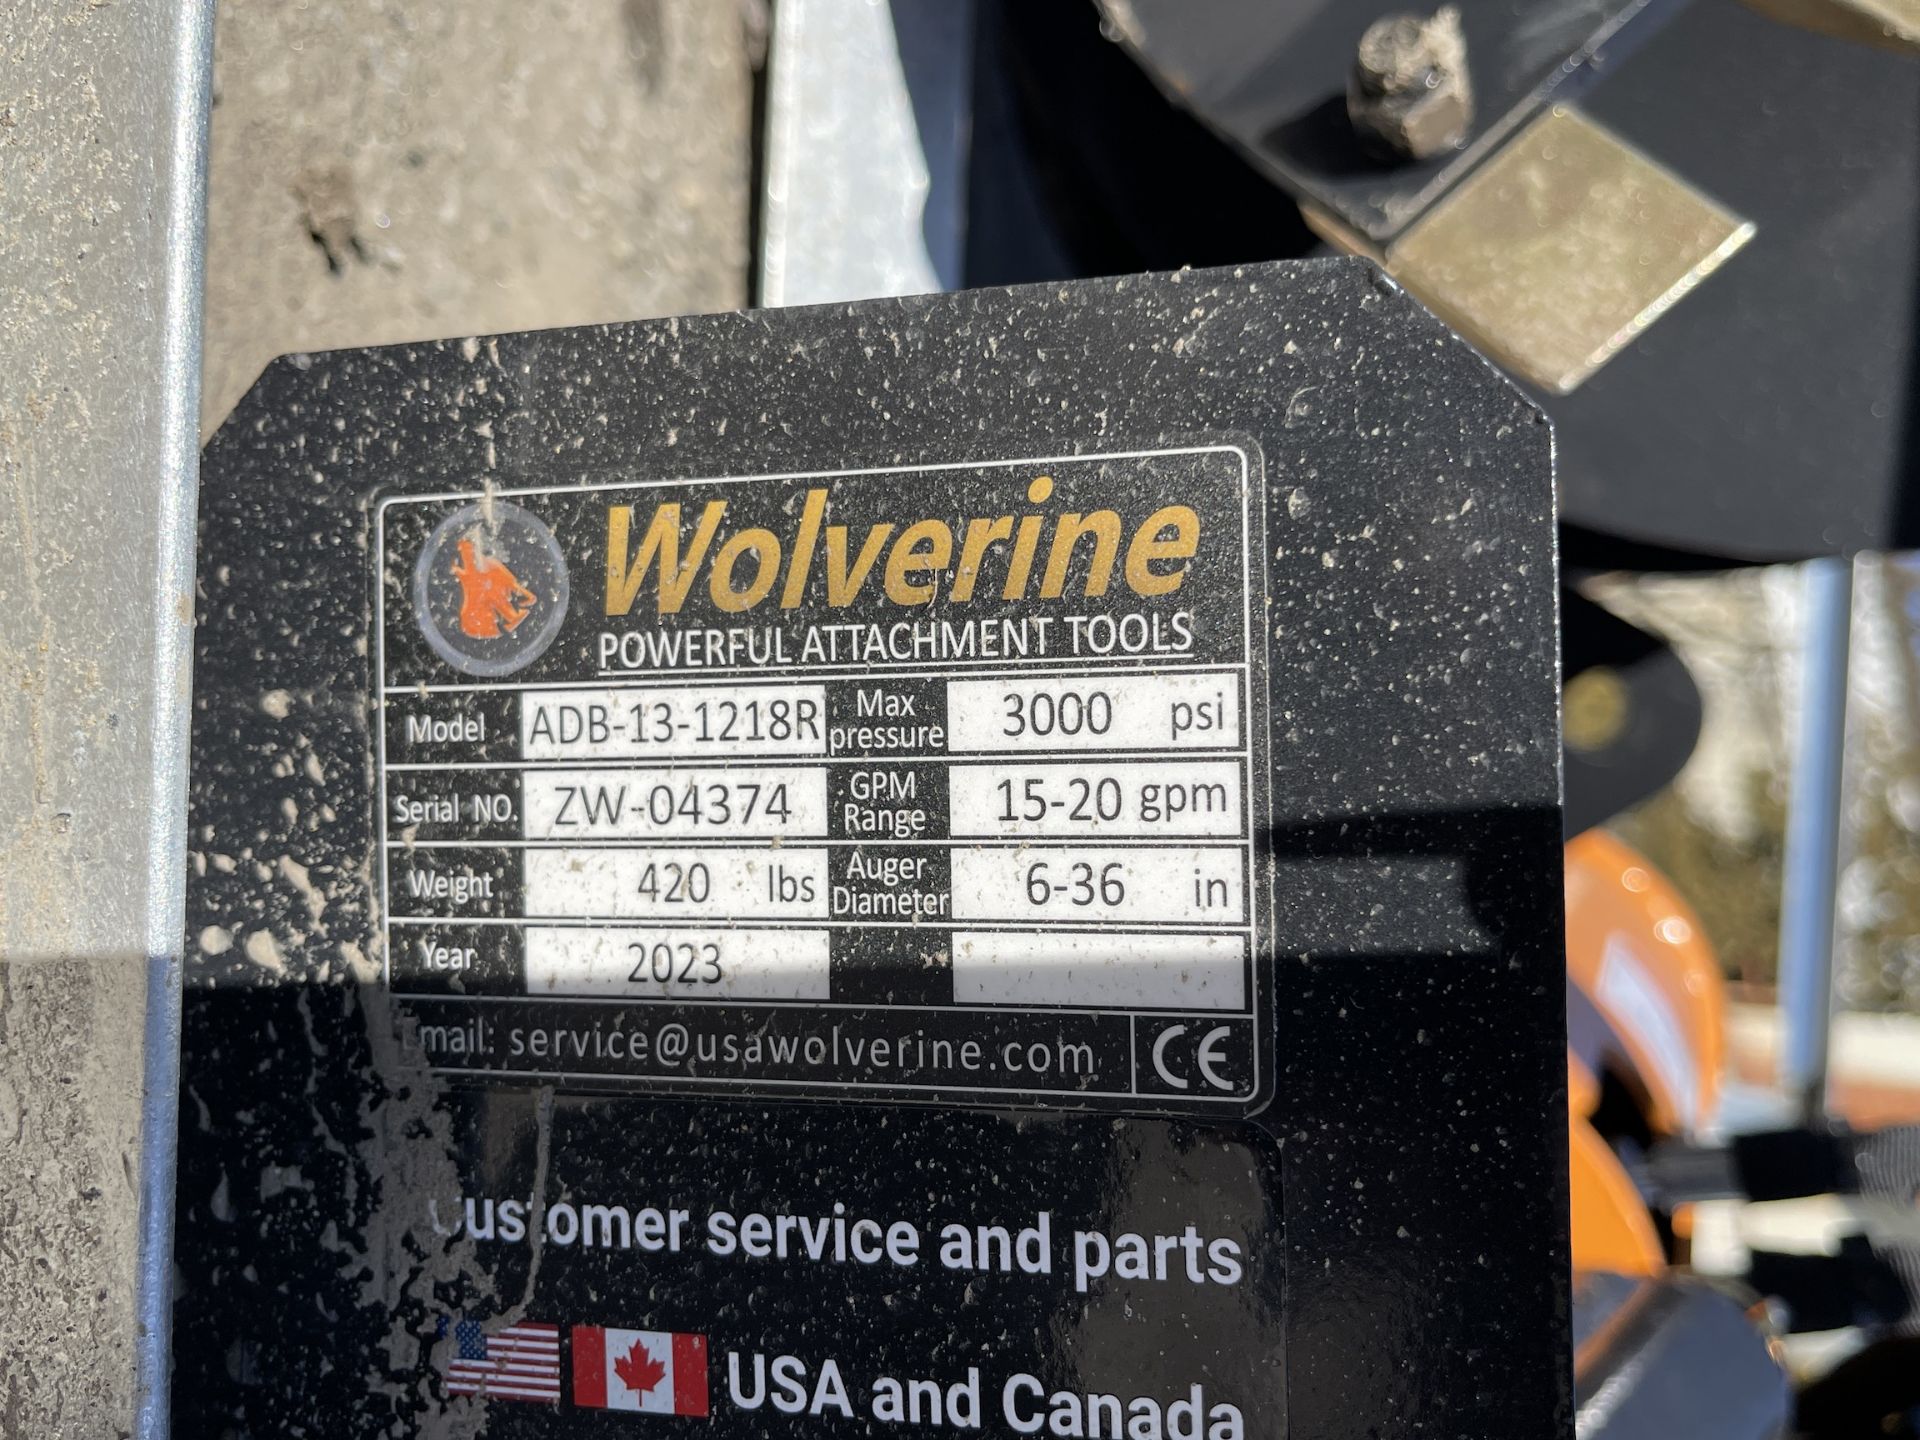 Brand New Wolverine Skid Steer Auger Attachment (C433E) - Image 3 of 7